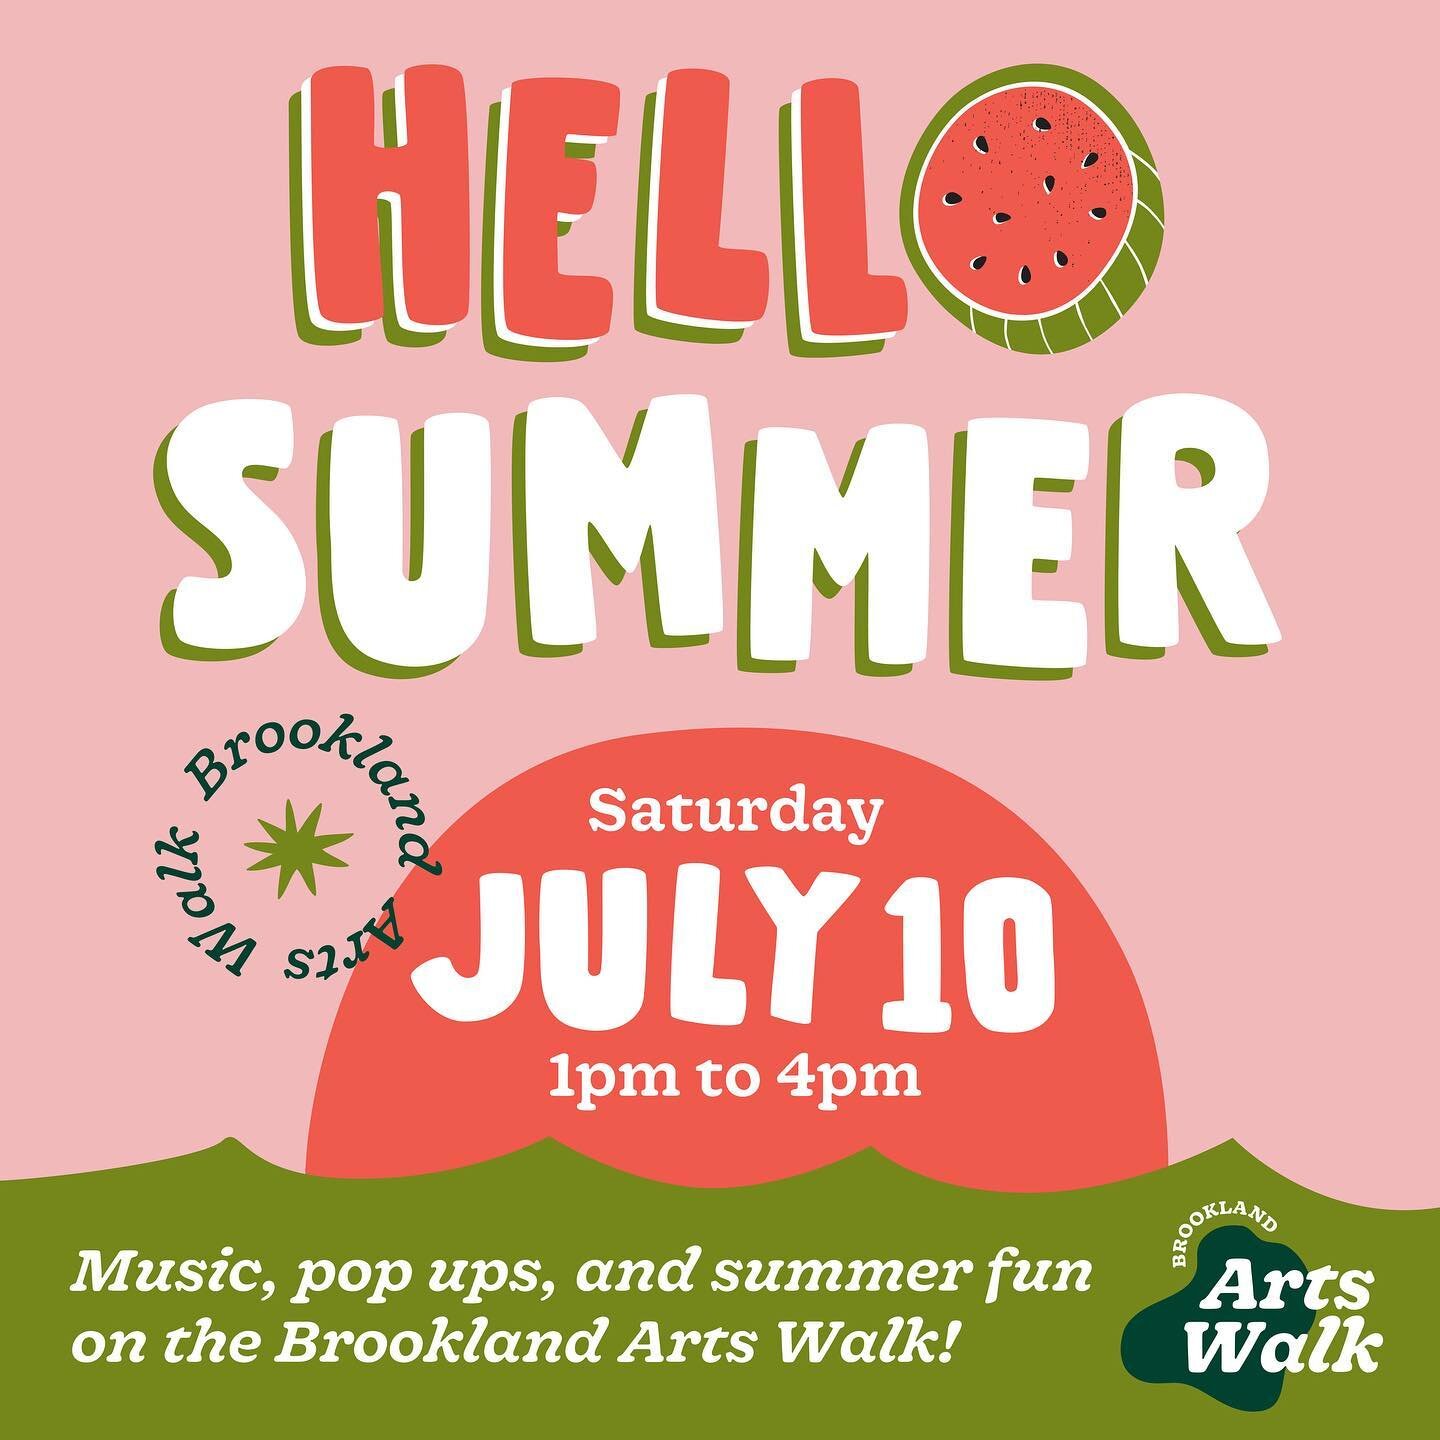 🛎 We&rsquo;re ringing in Summer with all our neighbors and you&rsquo;re invited, friends!

Come to the Brookland Arts Walk for a summer celebration of local art, pop ups, and summer activities! 

The Artist Studios will be hosting family friendly fu